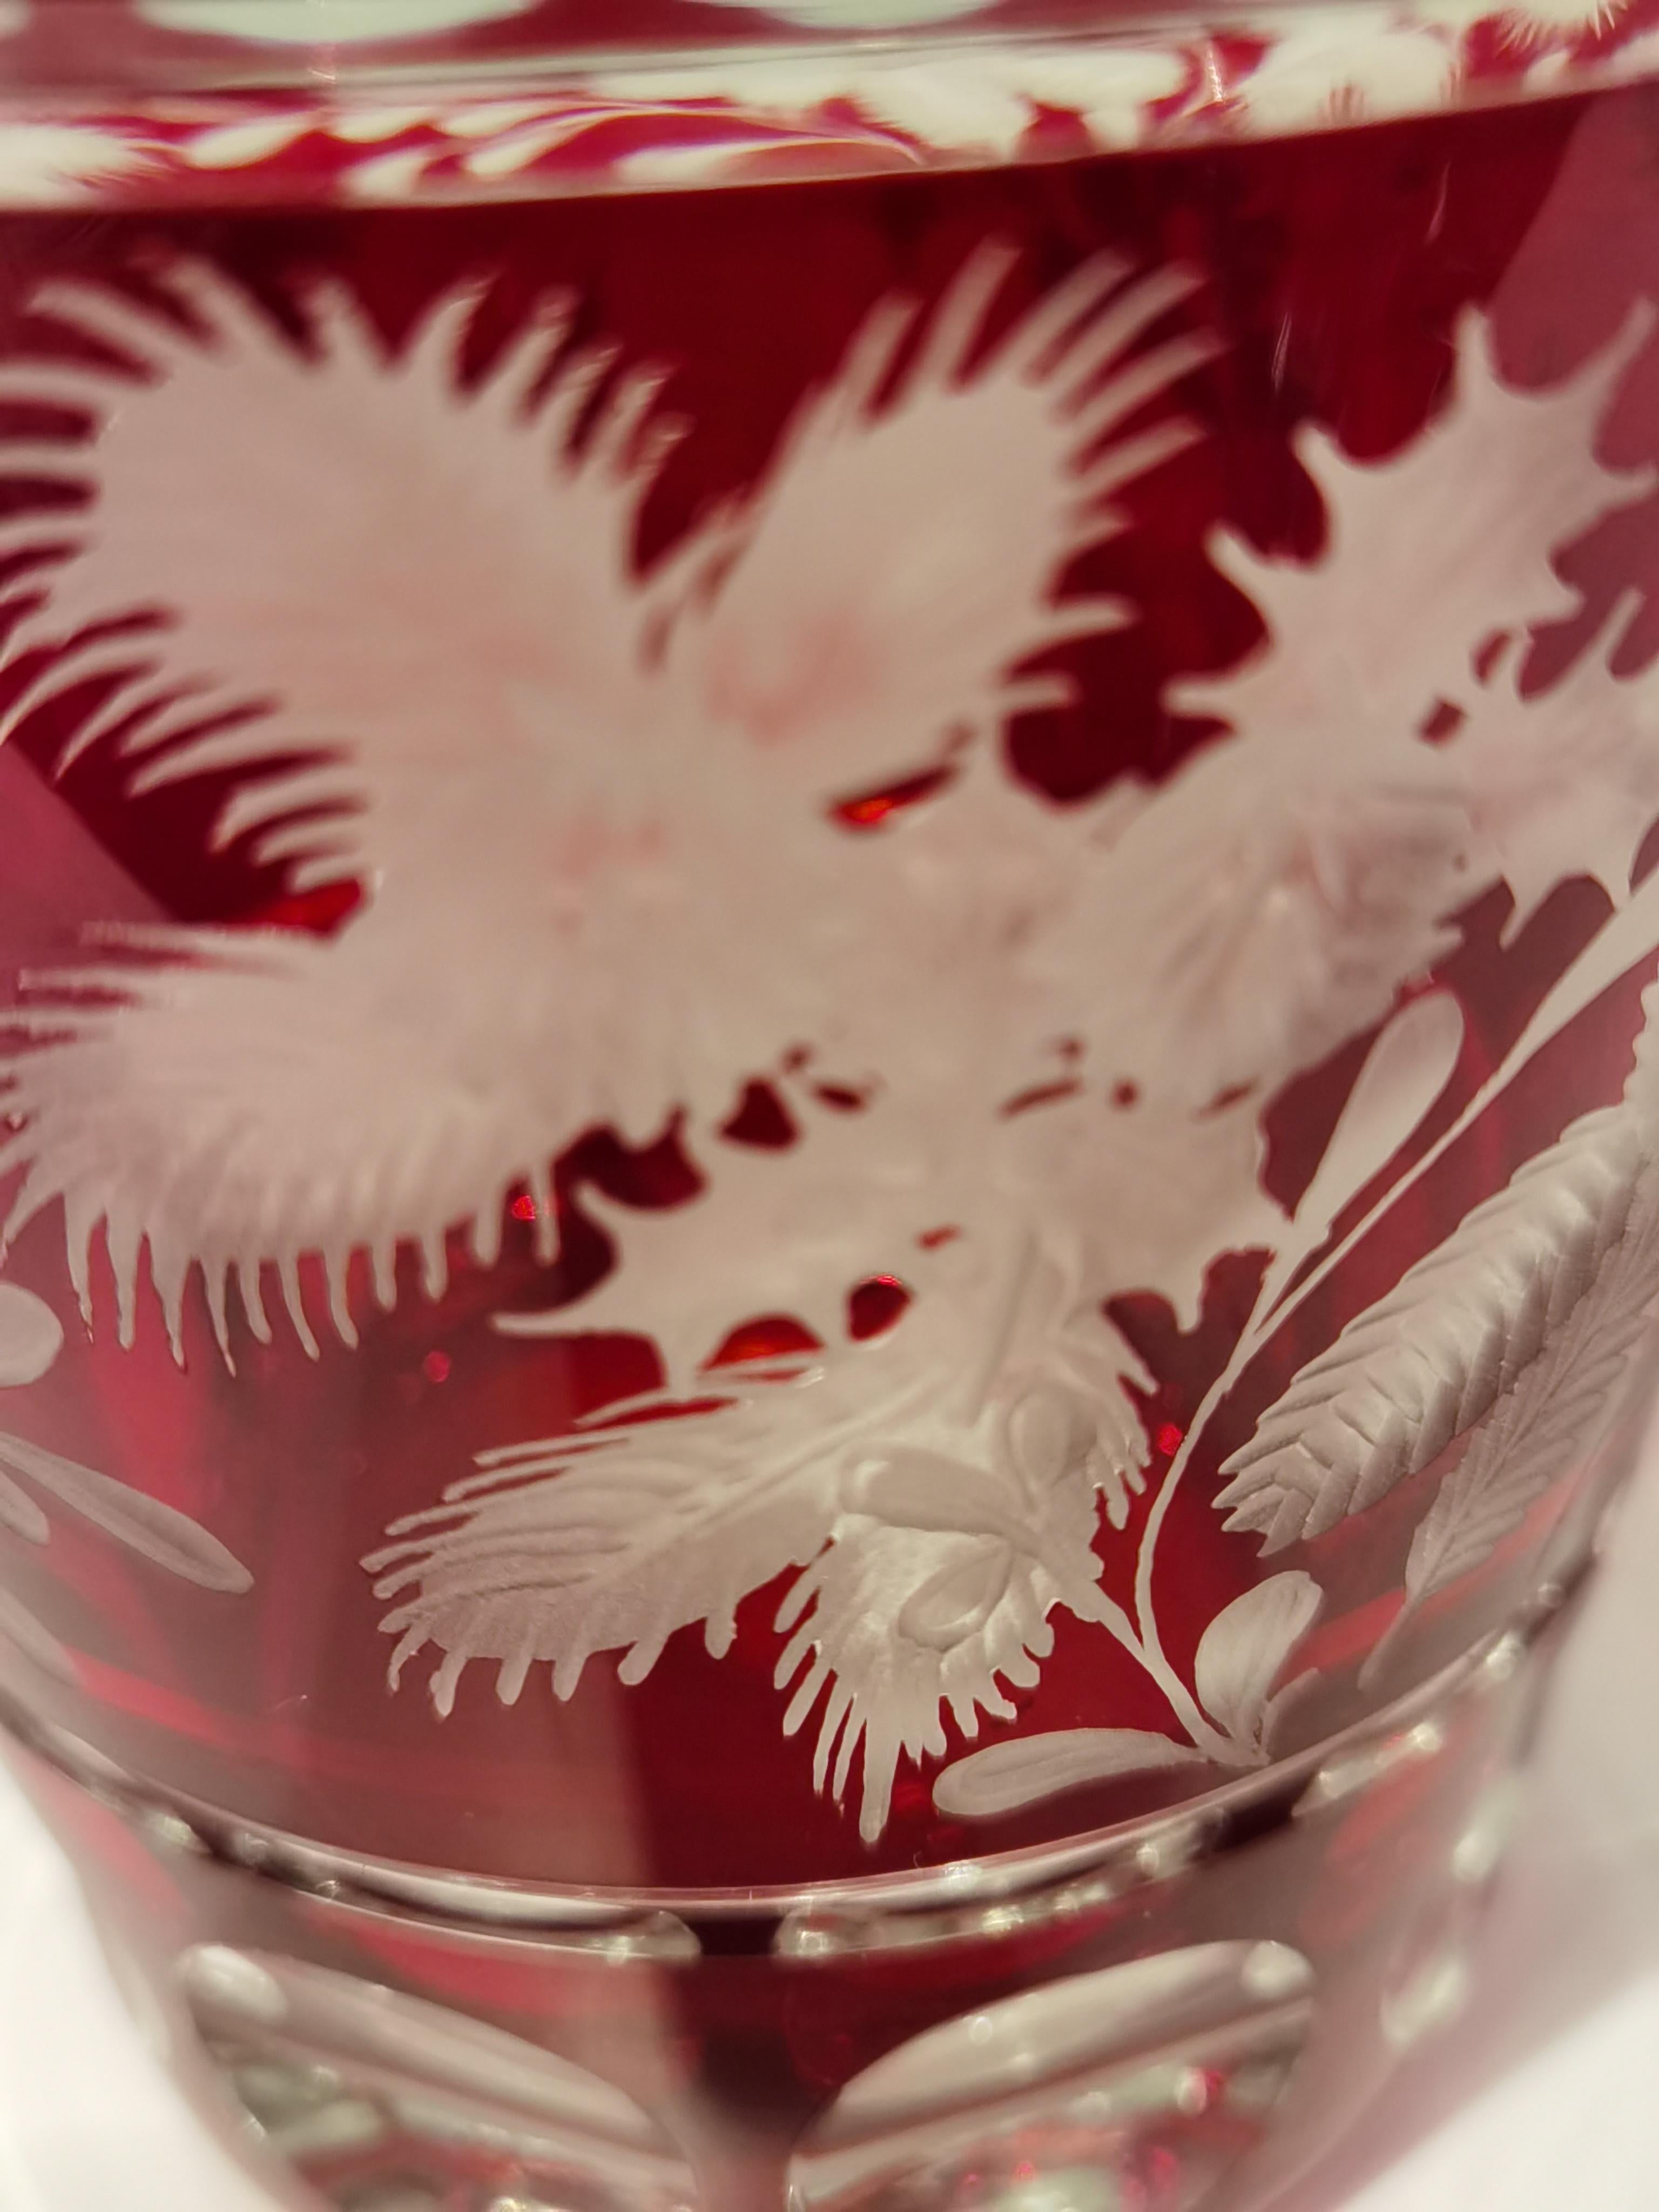 Hand blown country style crystal vase in red with an Xmas decor all around. The decor is hands-free engraved by glass artists in Bavaria by Sofina. Sofina glass and porcelain was found 2013 in Bavaria and lies a reversion to long-established